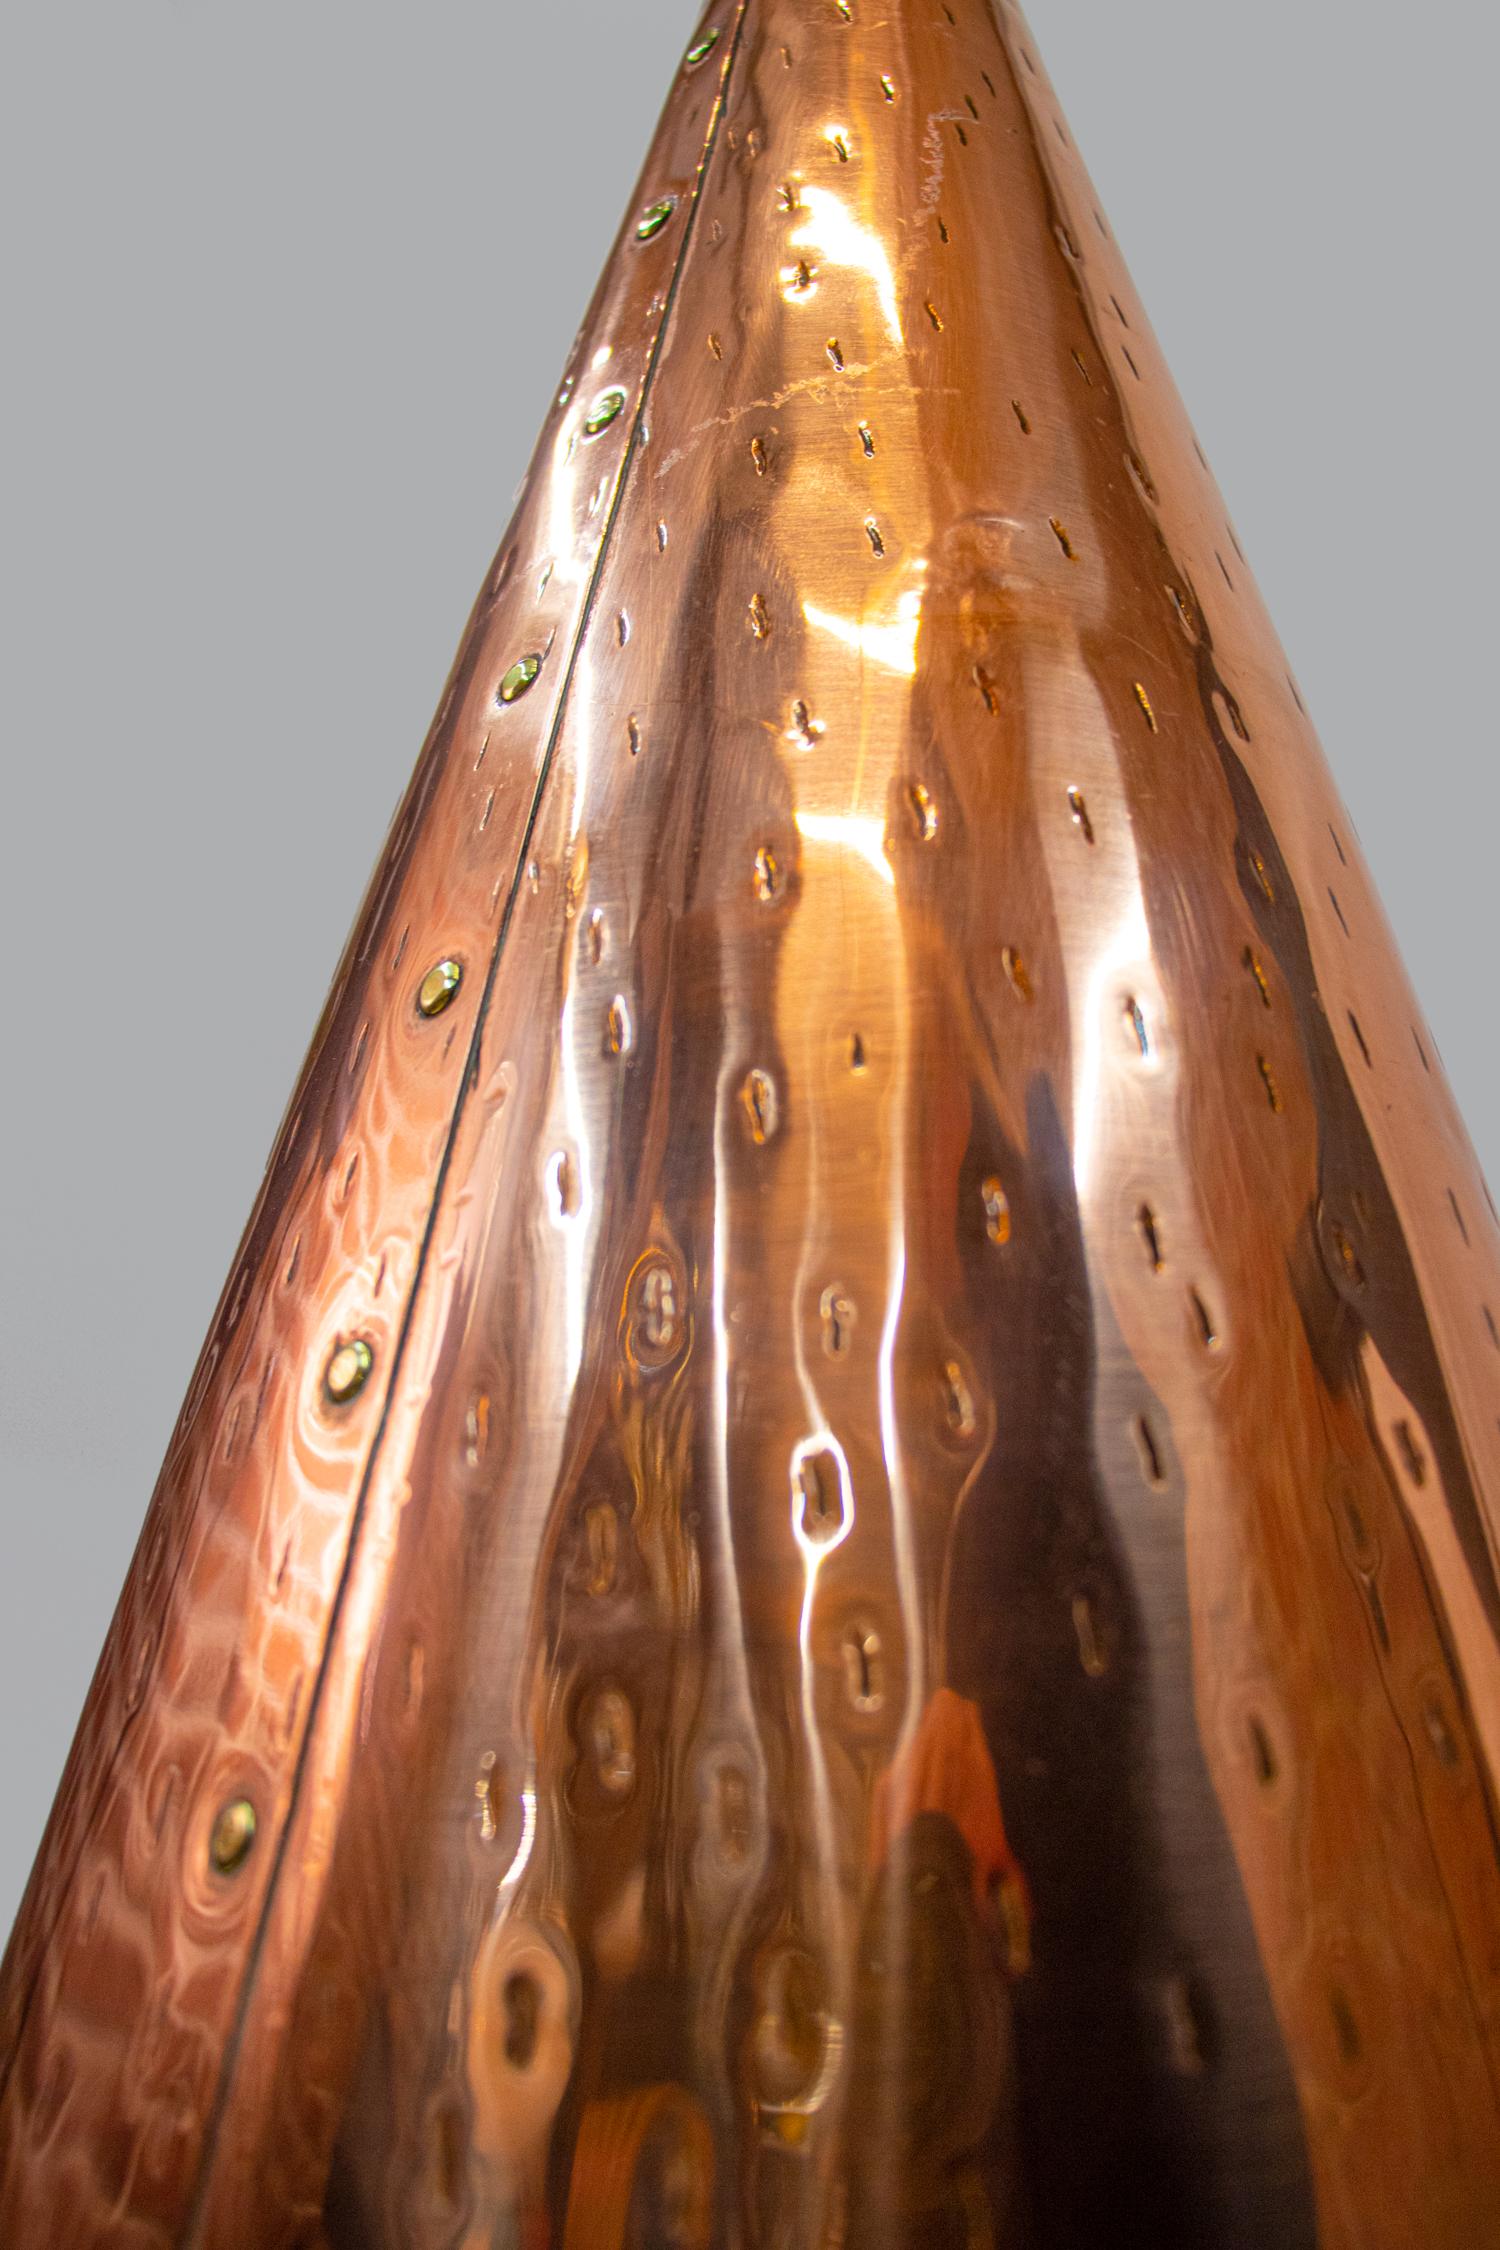 Scandinavian Modern Pair of Danish Hammered Copper Cone Pendant Lamps by E.S Horn Aalestrup, 1950s For Sale